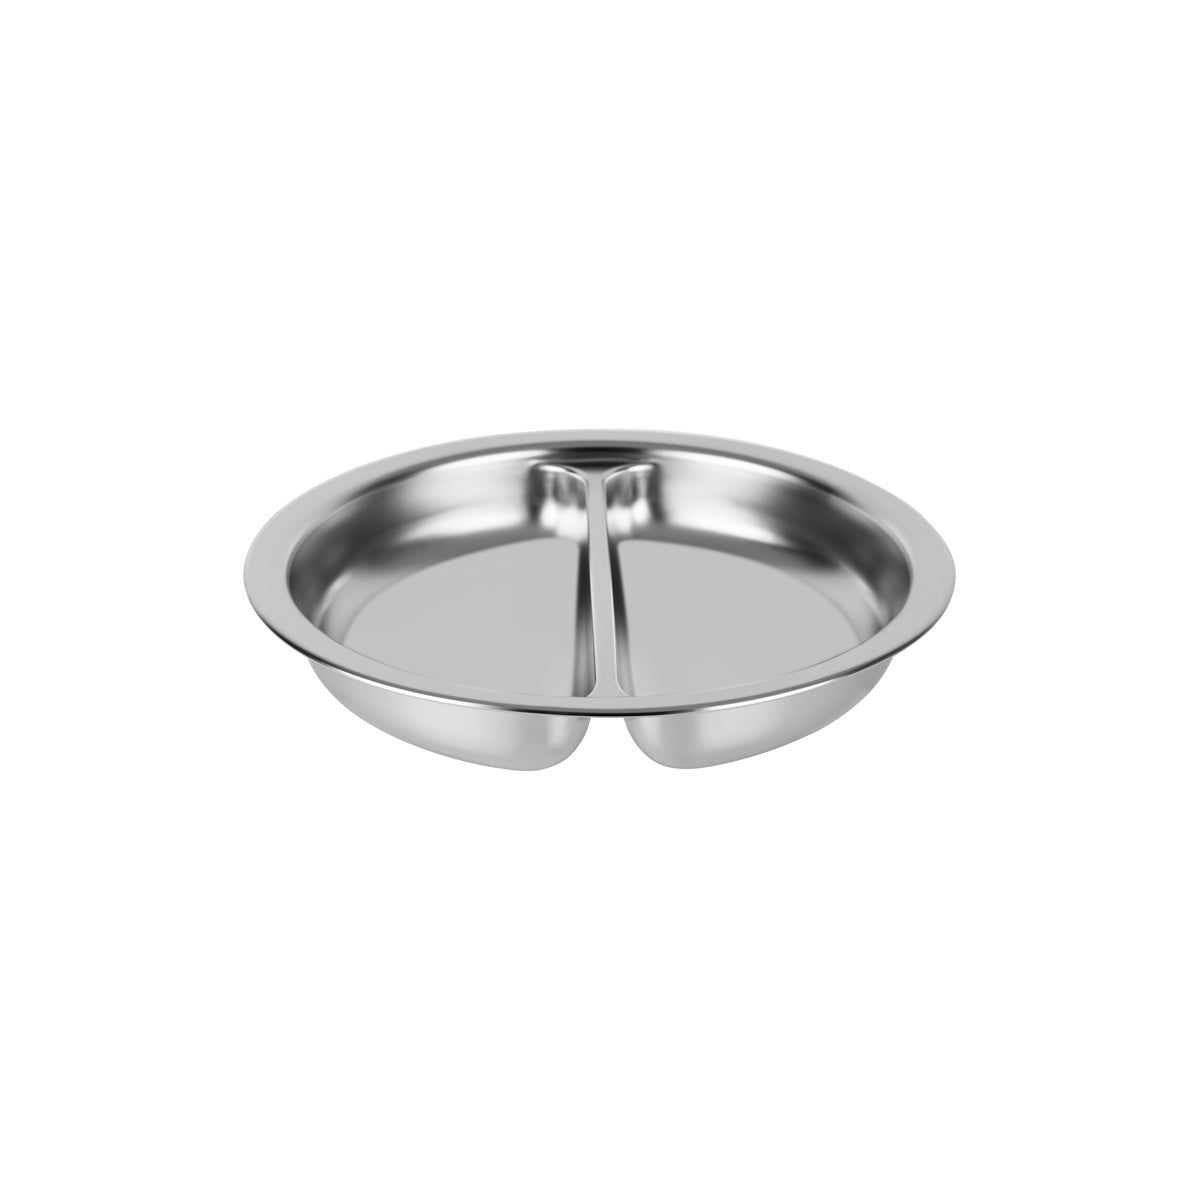 54925-D Chef Inox Round Divided Pan Stainless Steel to Suit 54925 Tomkin Australia Hospitality Supplies